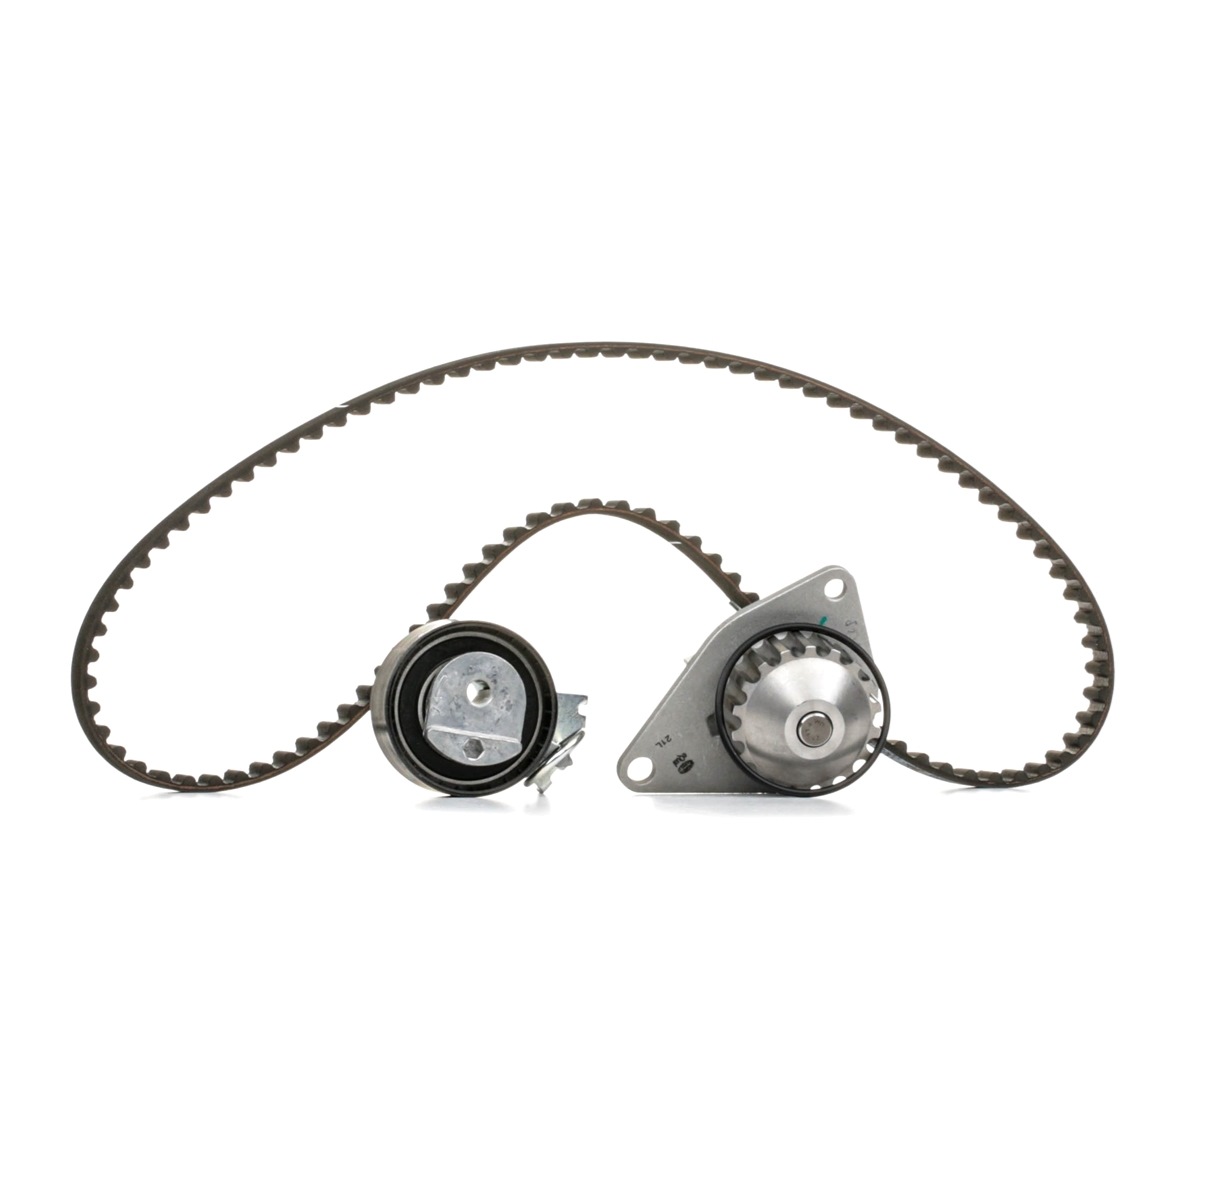 MAGNETI MARELLI 132011160059 Water pump and timing belt kit CITROËN experience and price